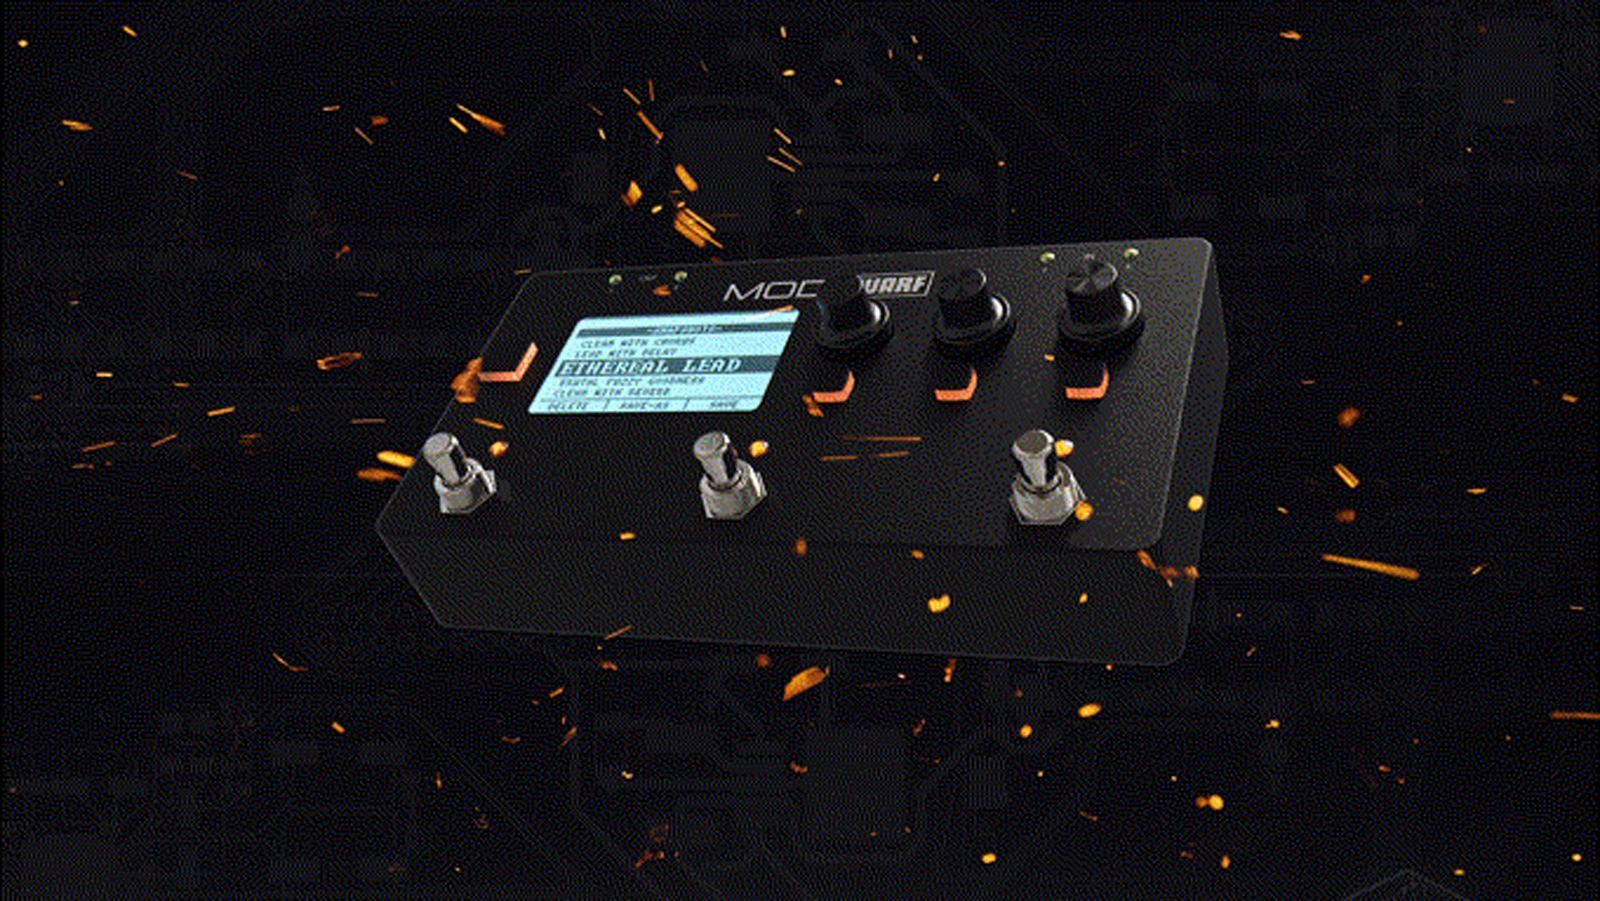 Mod S Latest Effects Pedal Makes Advanced Sounds More Accessible